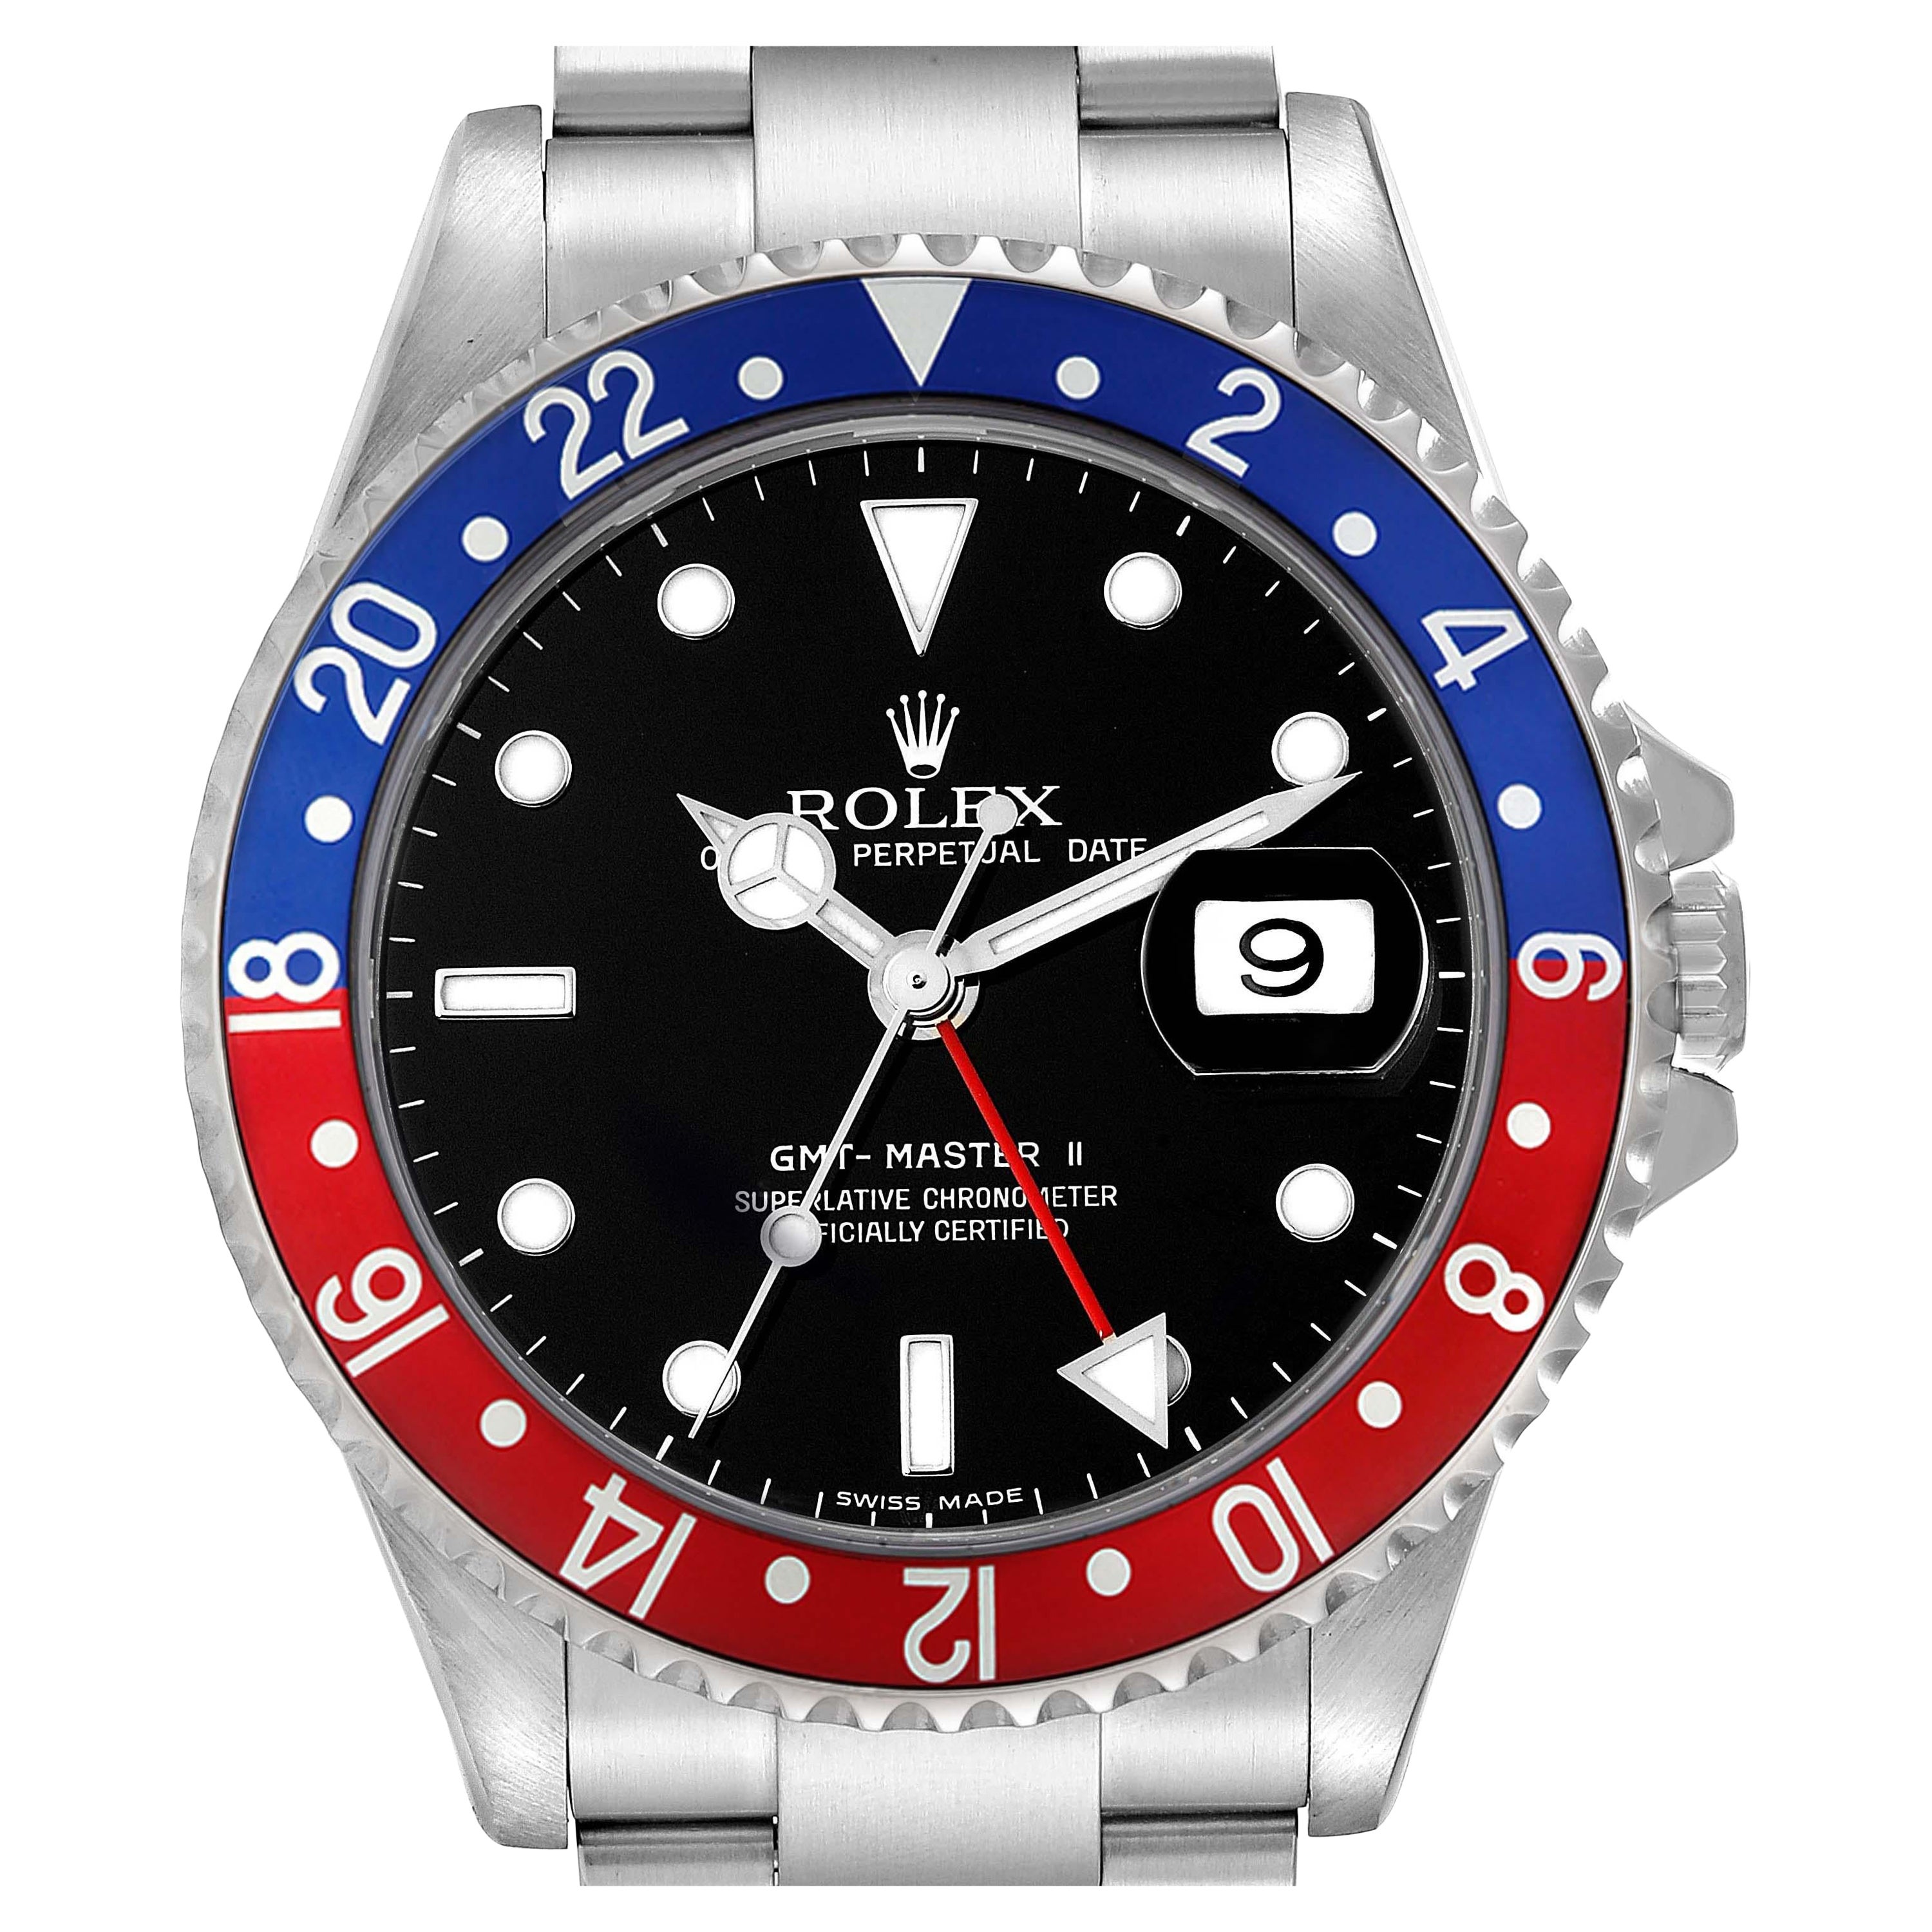 Rolex GMT Master II Blue Red Pepsi Error Dial Steel Mens Watch 16710 Box Papers For Sale